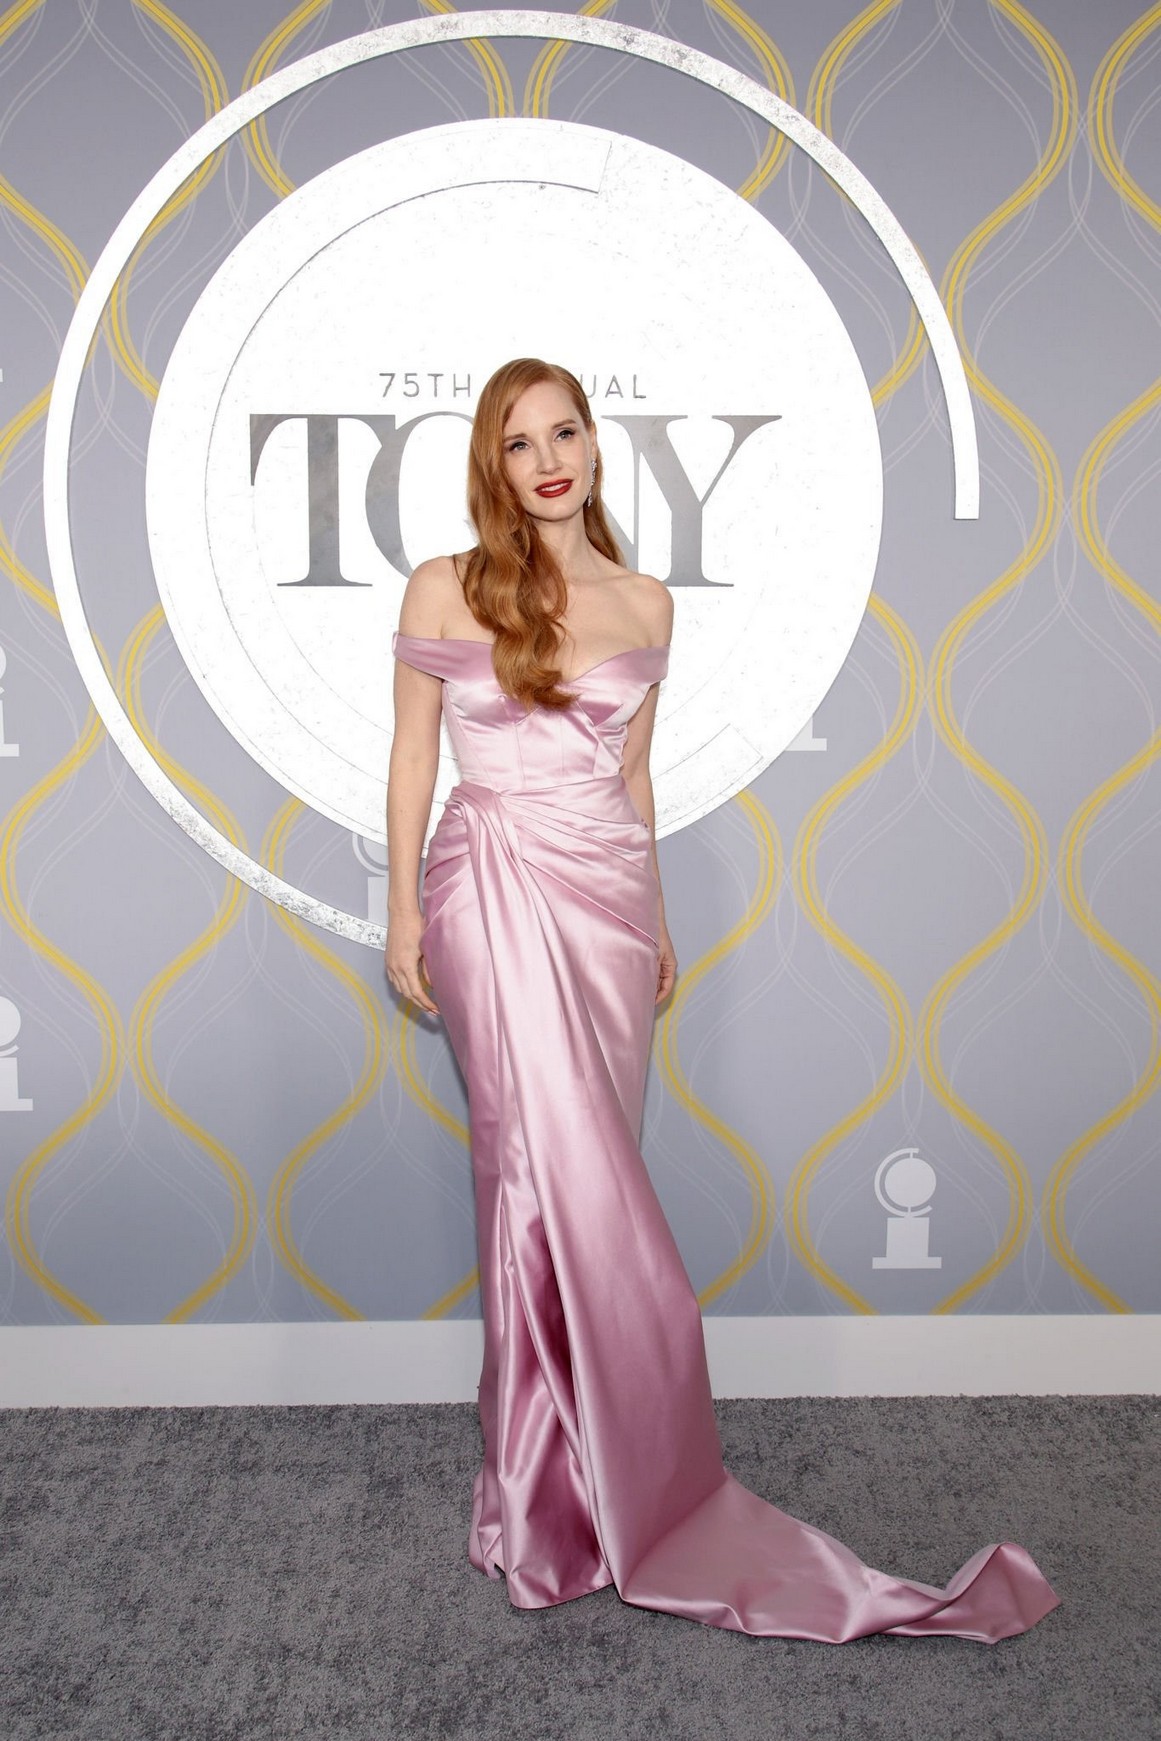 Jessica Chastain Cleavage TheFappening.Pro 4 - Jessica Chastain Cleavage (16 Photos)